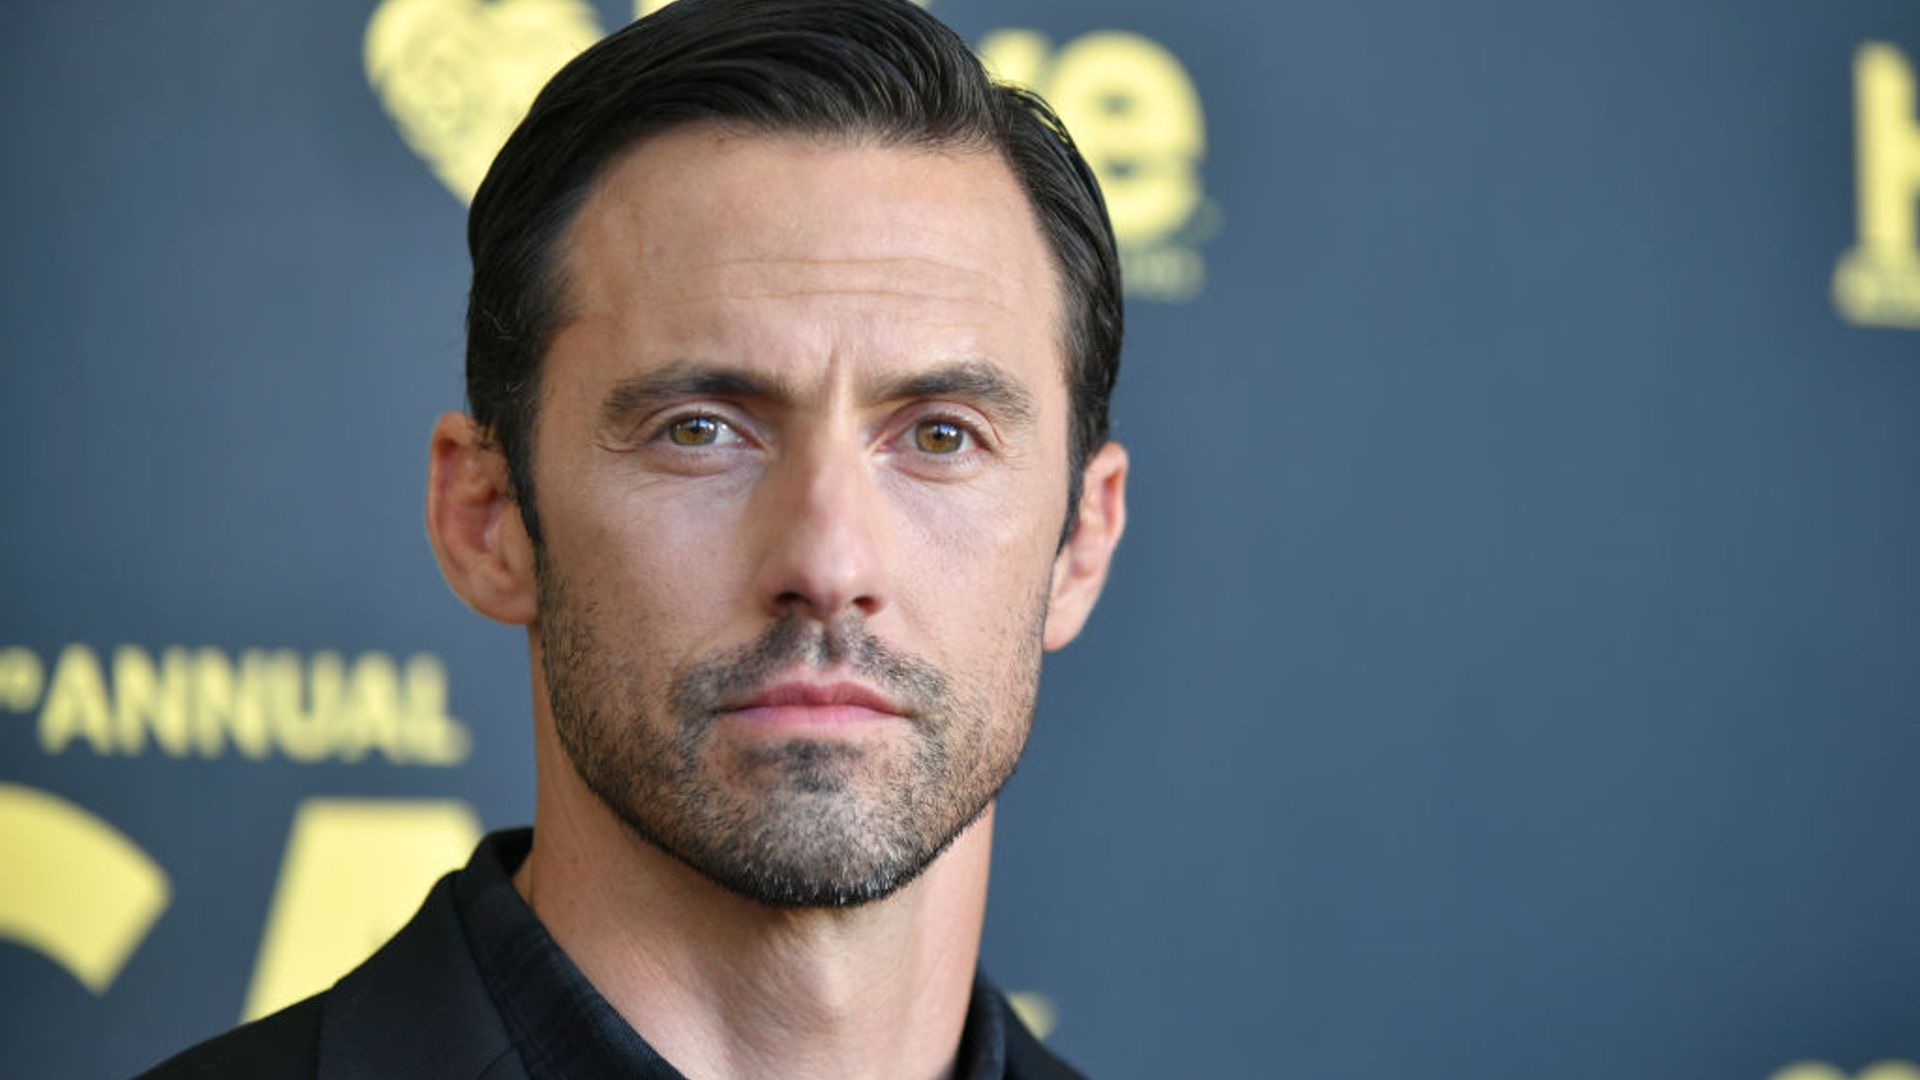 This Is Us star Milo Ventimiglia ties the knot in private ceremony: report